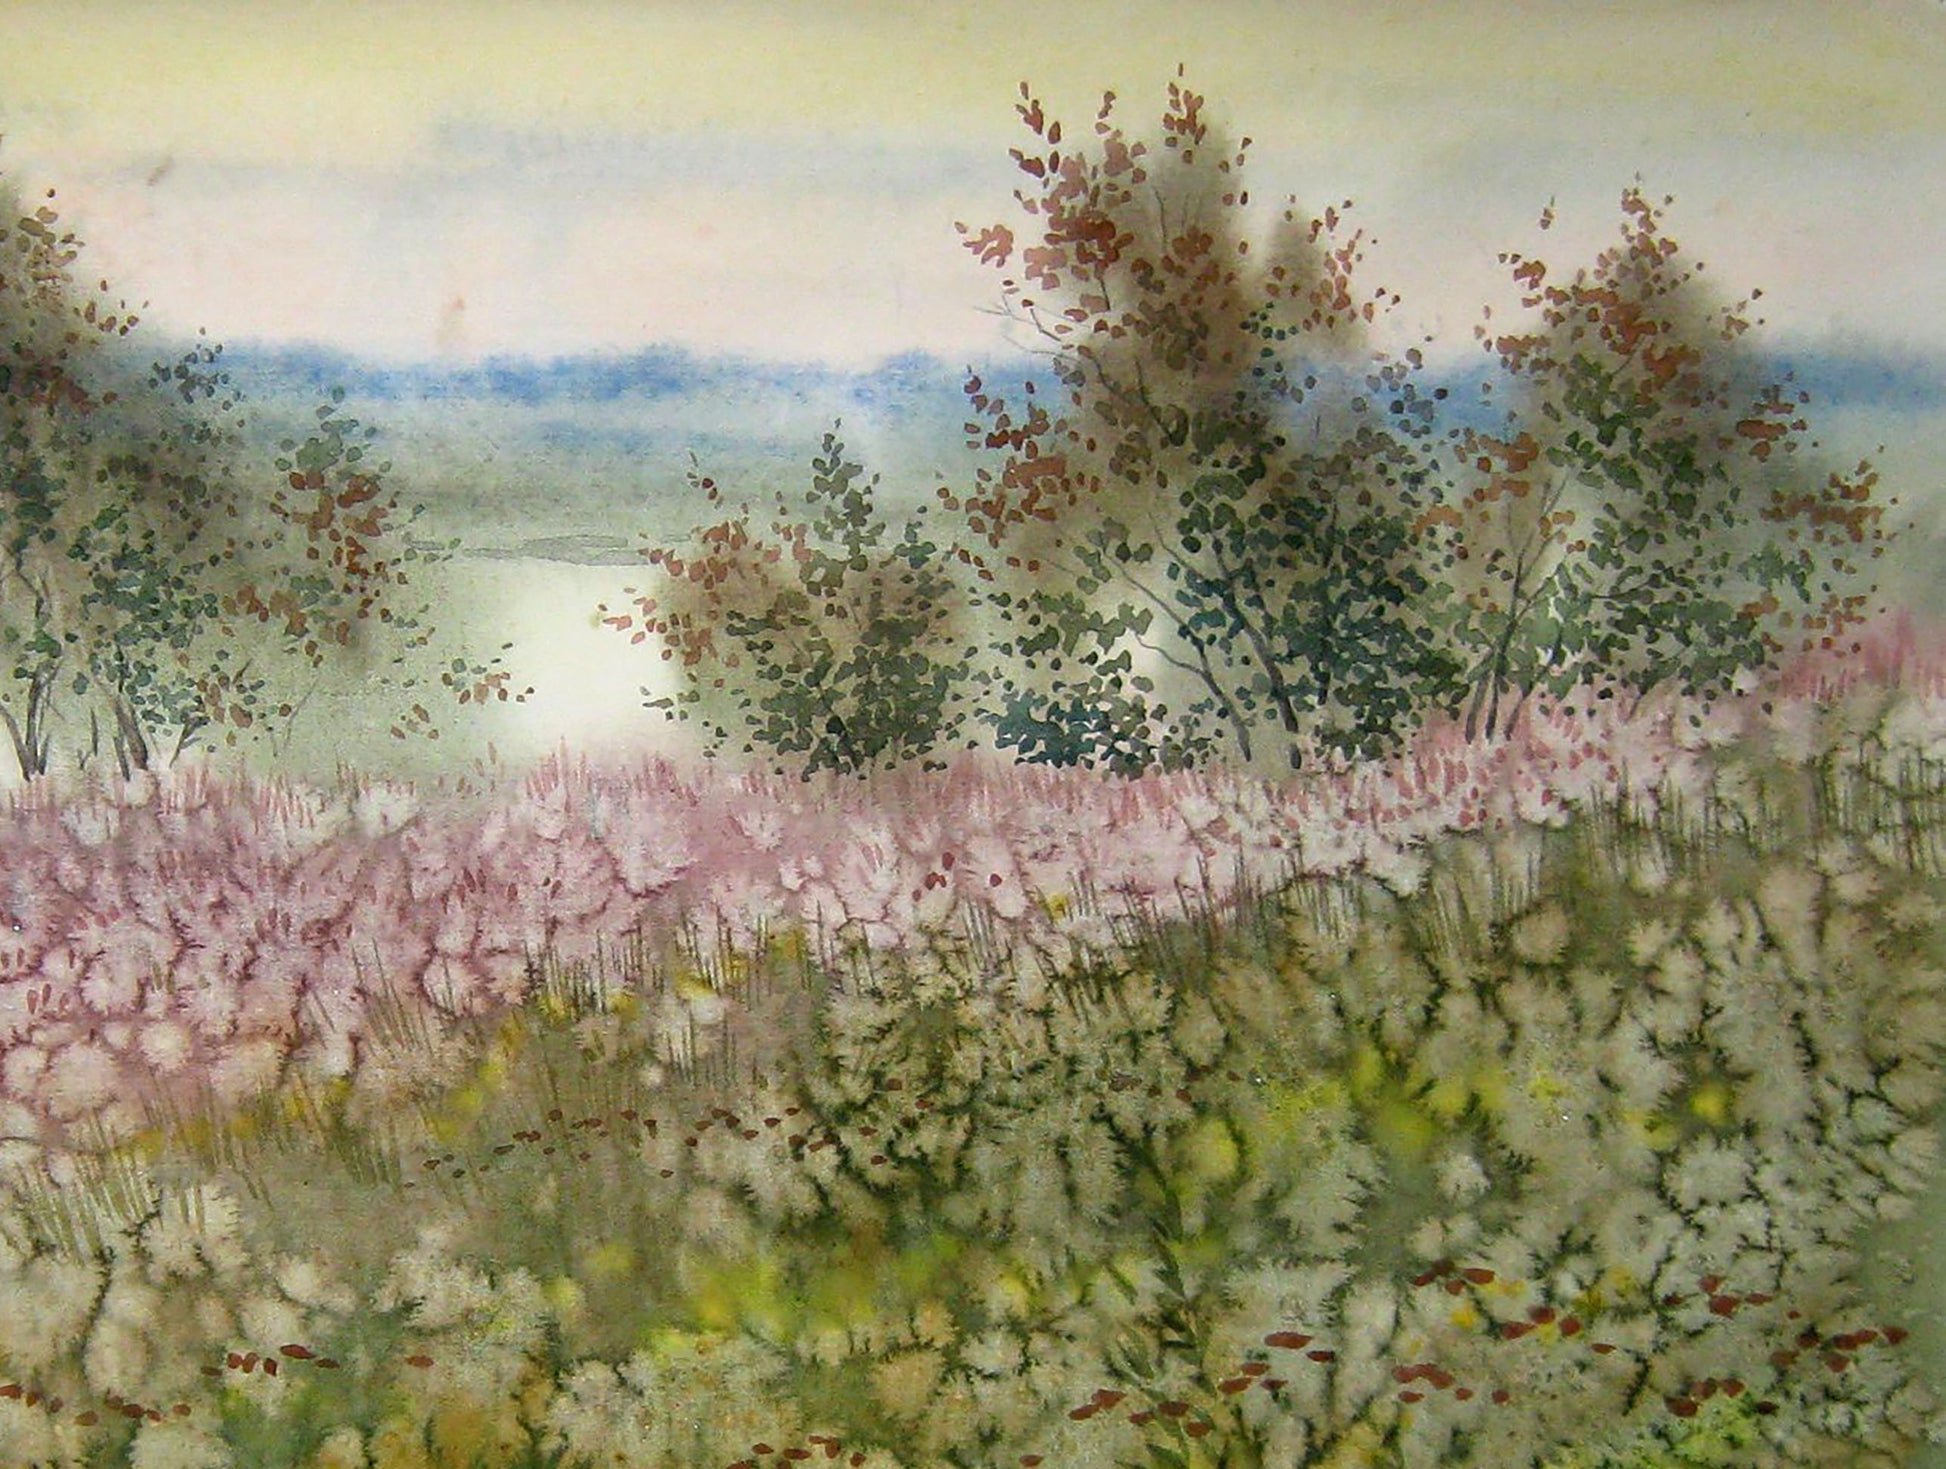 The Grass in Bloom portrayed in a watercolor by Valery Savenets